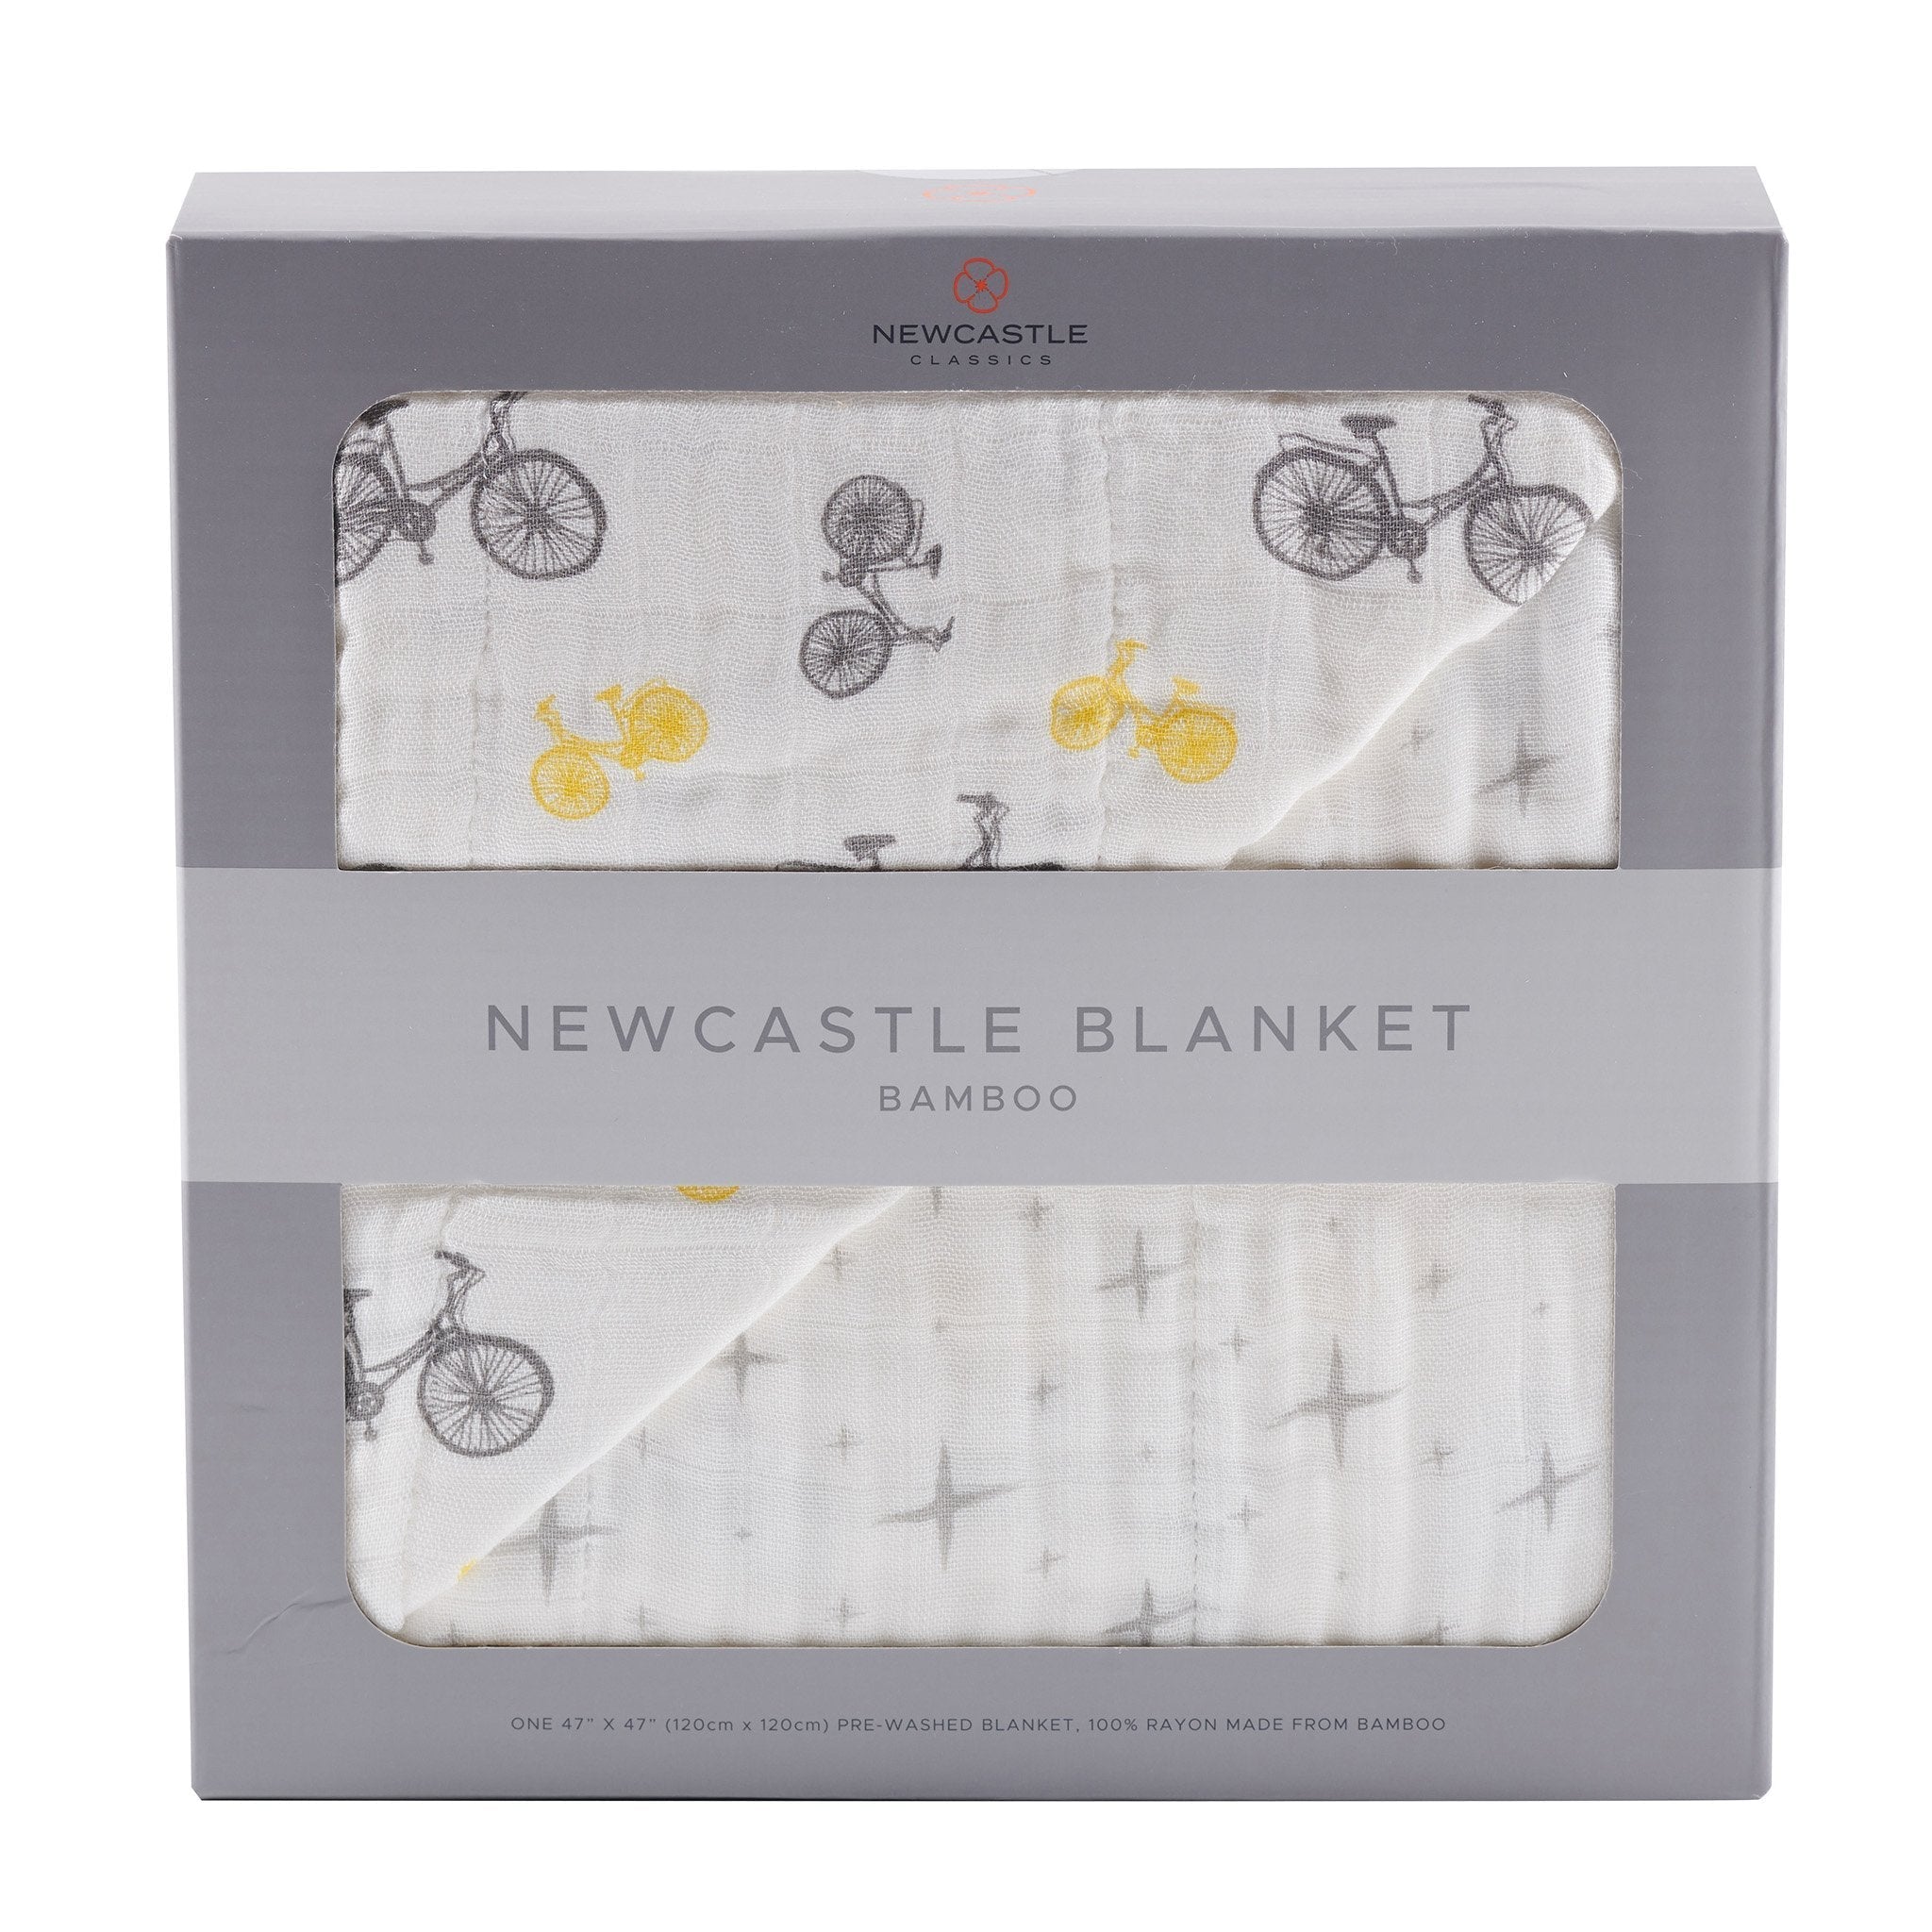 Vintage Bicycle and Northern Star Bamboo Muslin Newcastle Blanket | Newcastle Classics